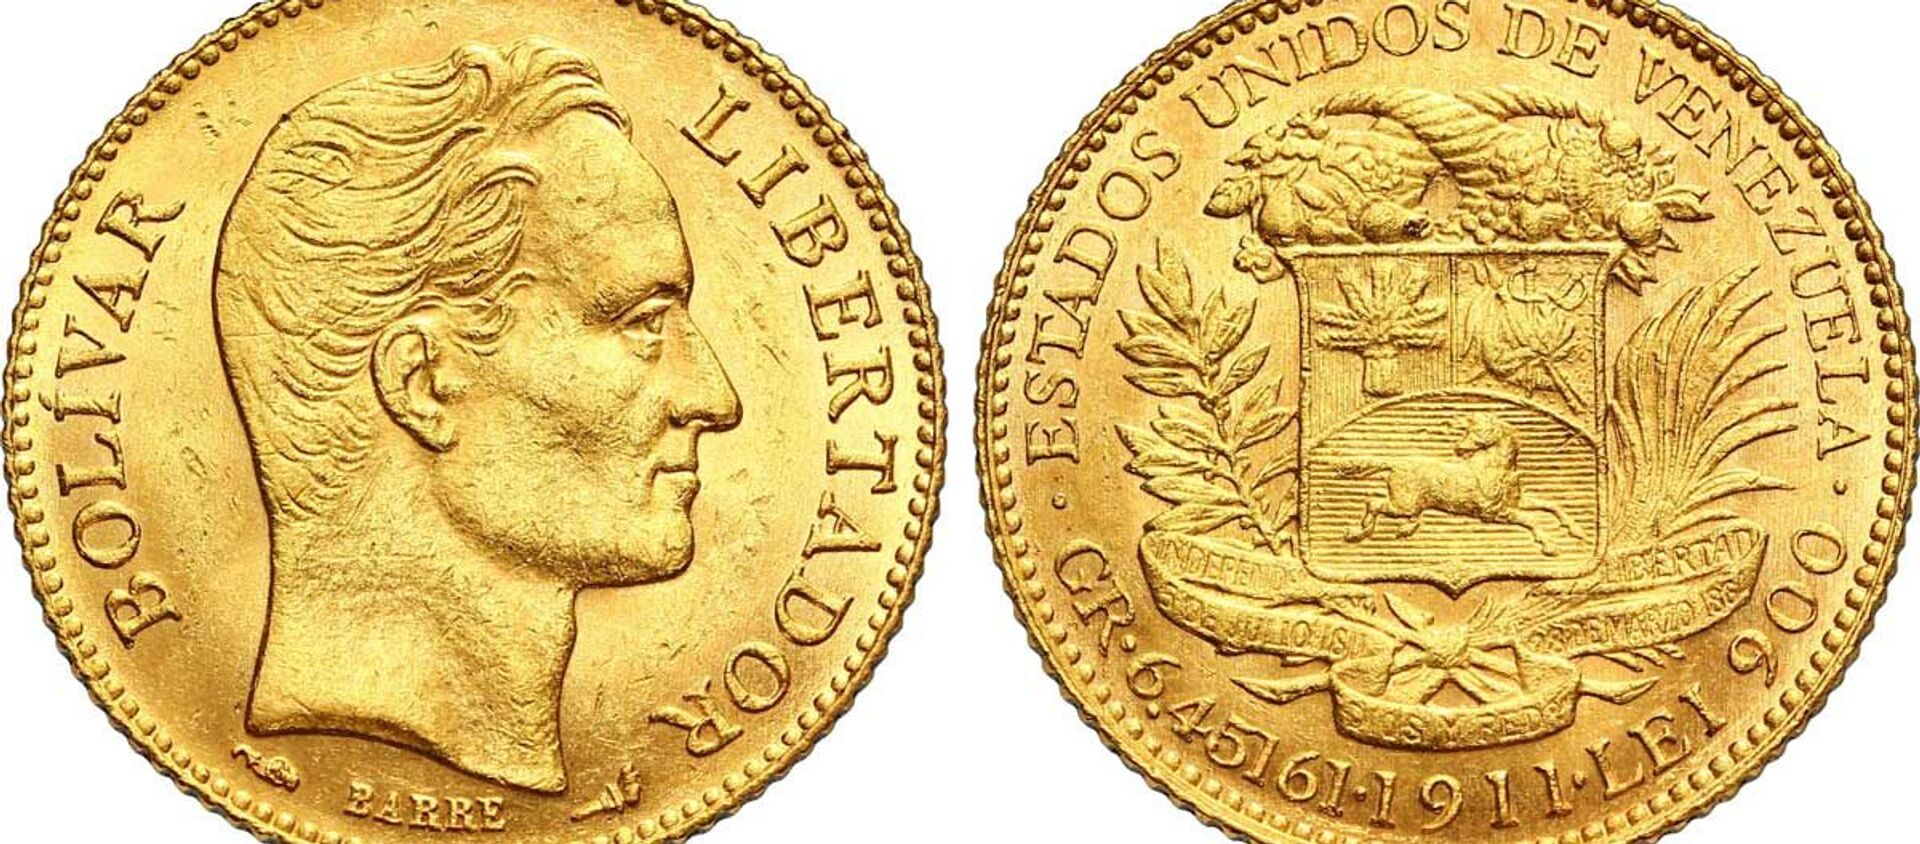 1911 gold 20 bolivares coin featuring the face of Simon Bolivar, a Venezuelan political leader and general who led much of Latin America to independence from the Spanish Empire. - Sputnik International, 1920, 20.07.2021